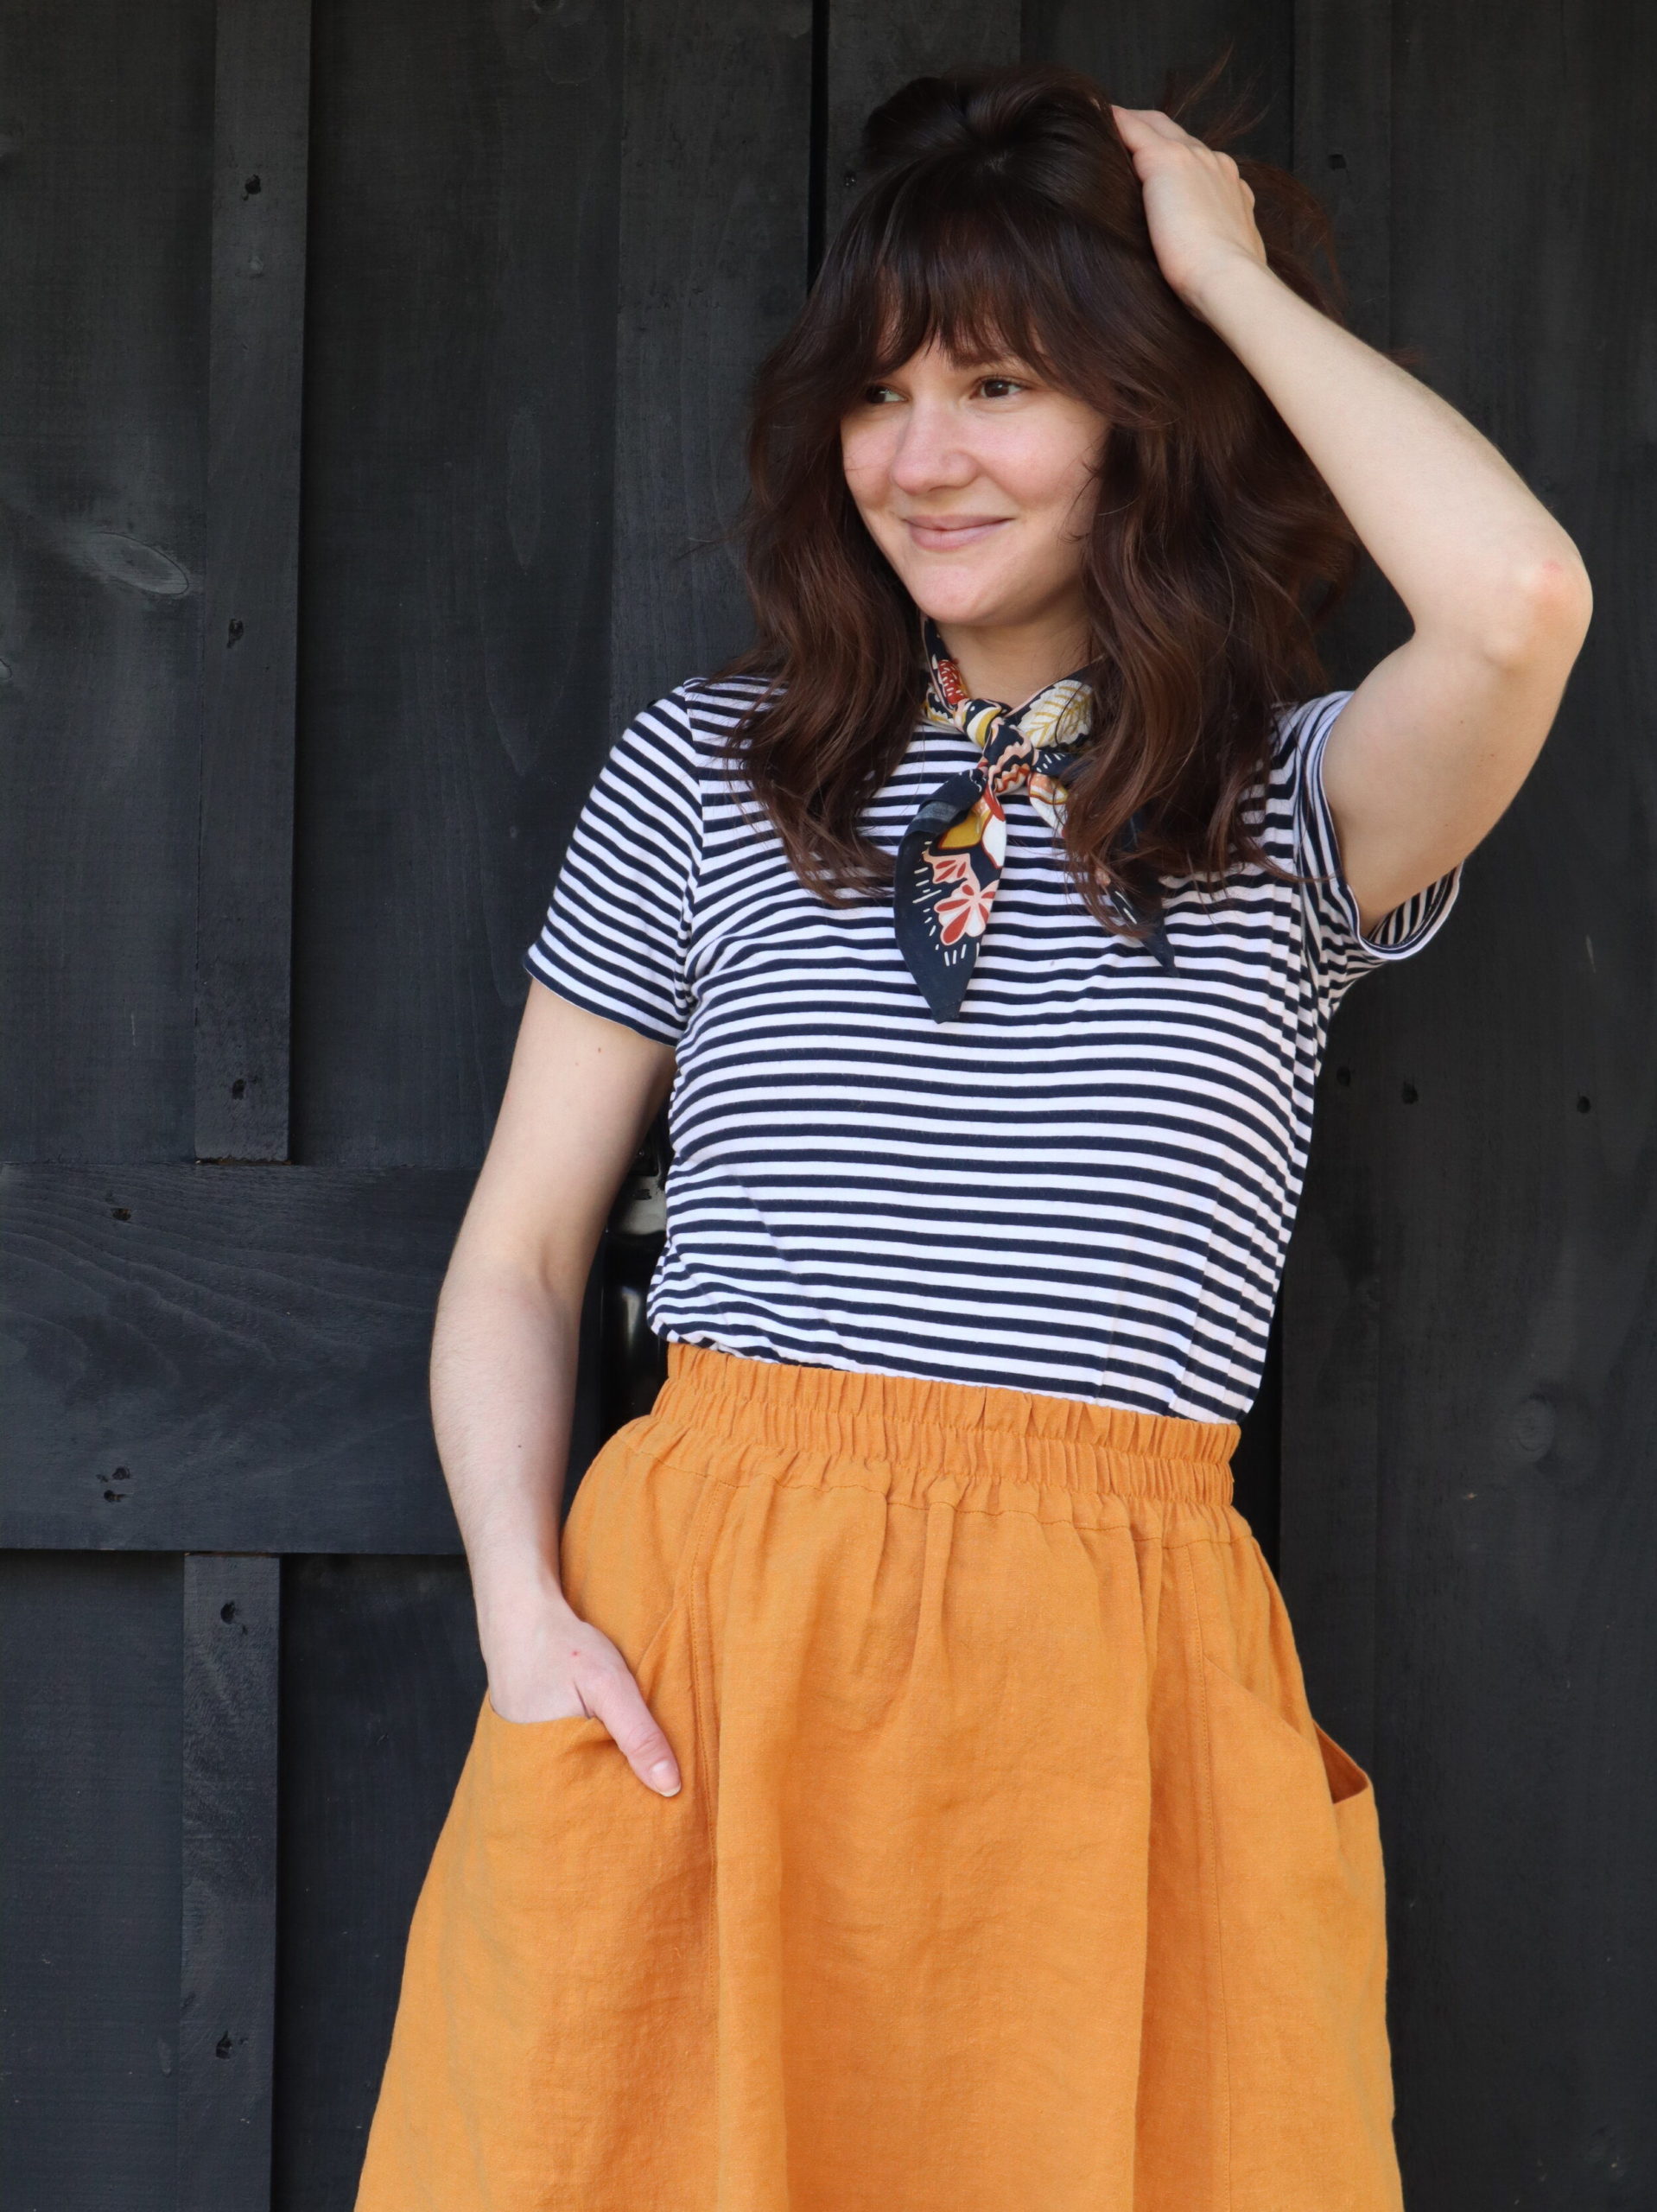 Meredith wears a striped tee and orange gypsum skirt in front of a black wooden wall